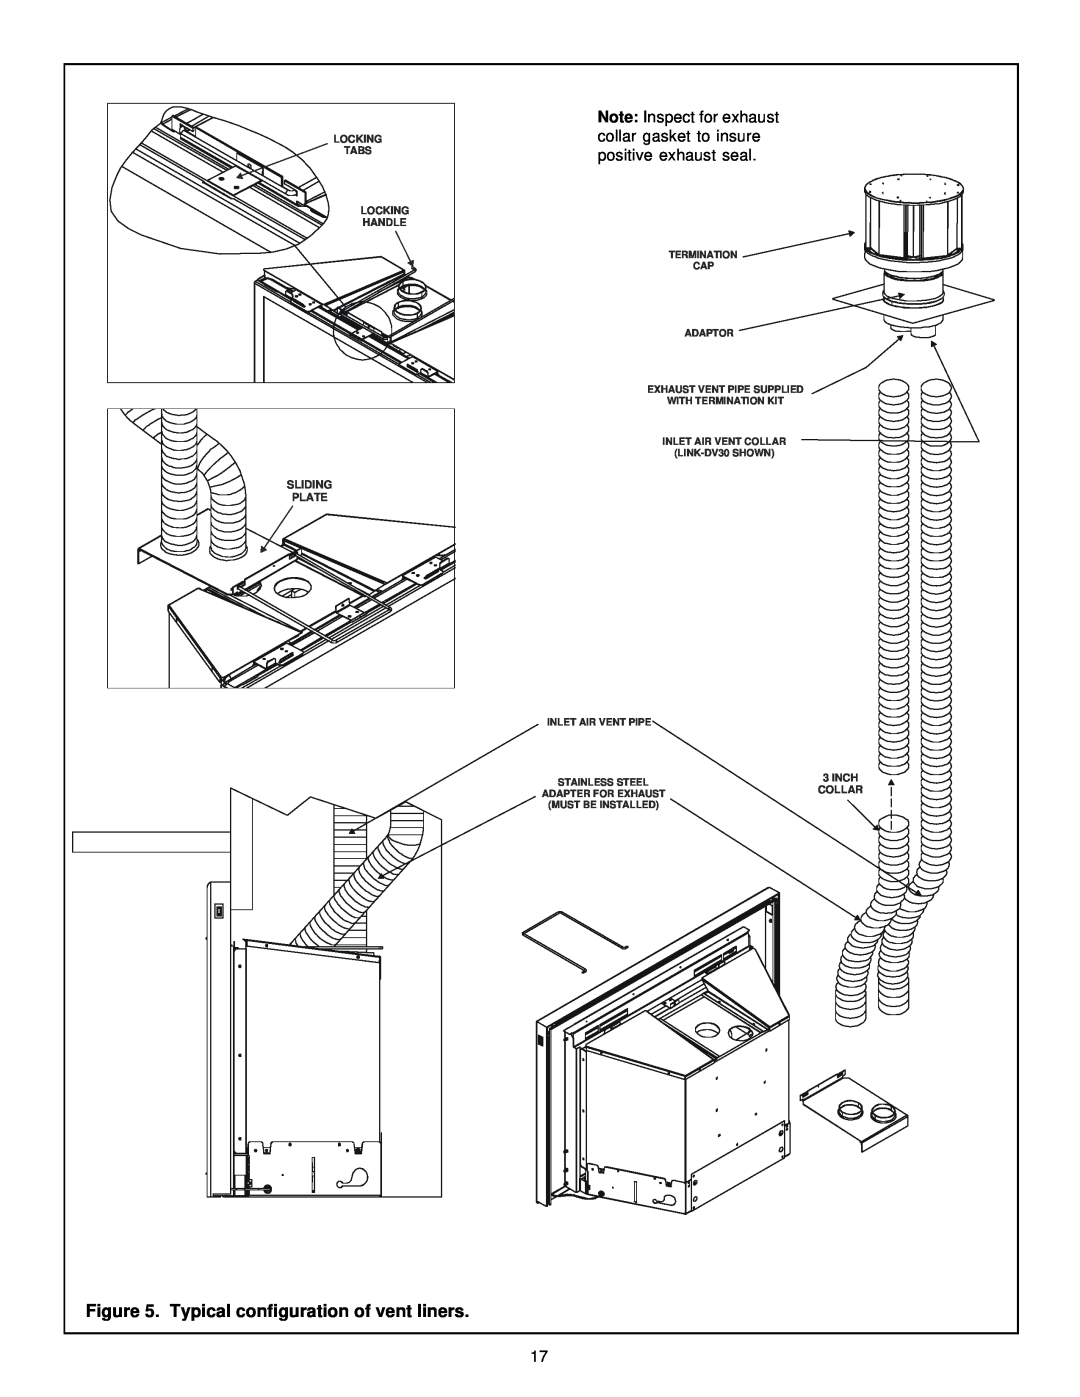 Heat & Glo LifeStyle FB-IN Typical configuration of vent liners, Stainless Steel, Adapter For Exhaust, Must Be Installed 